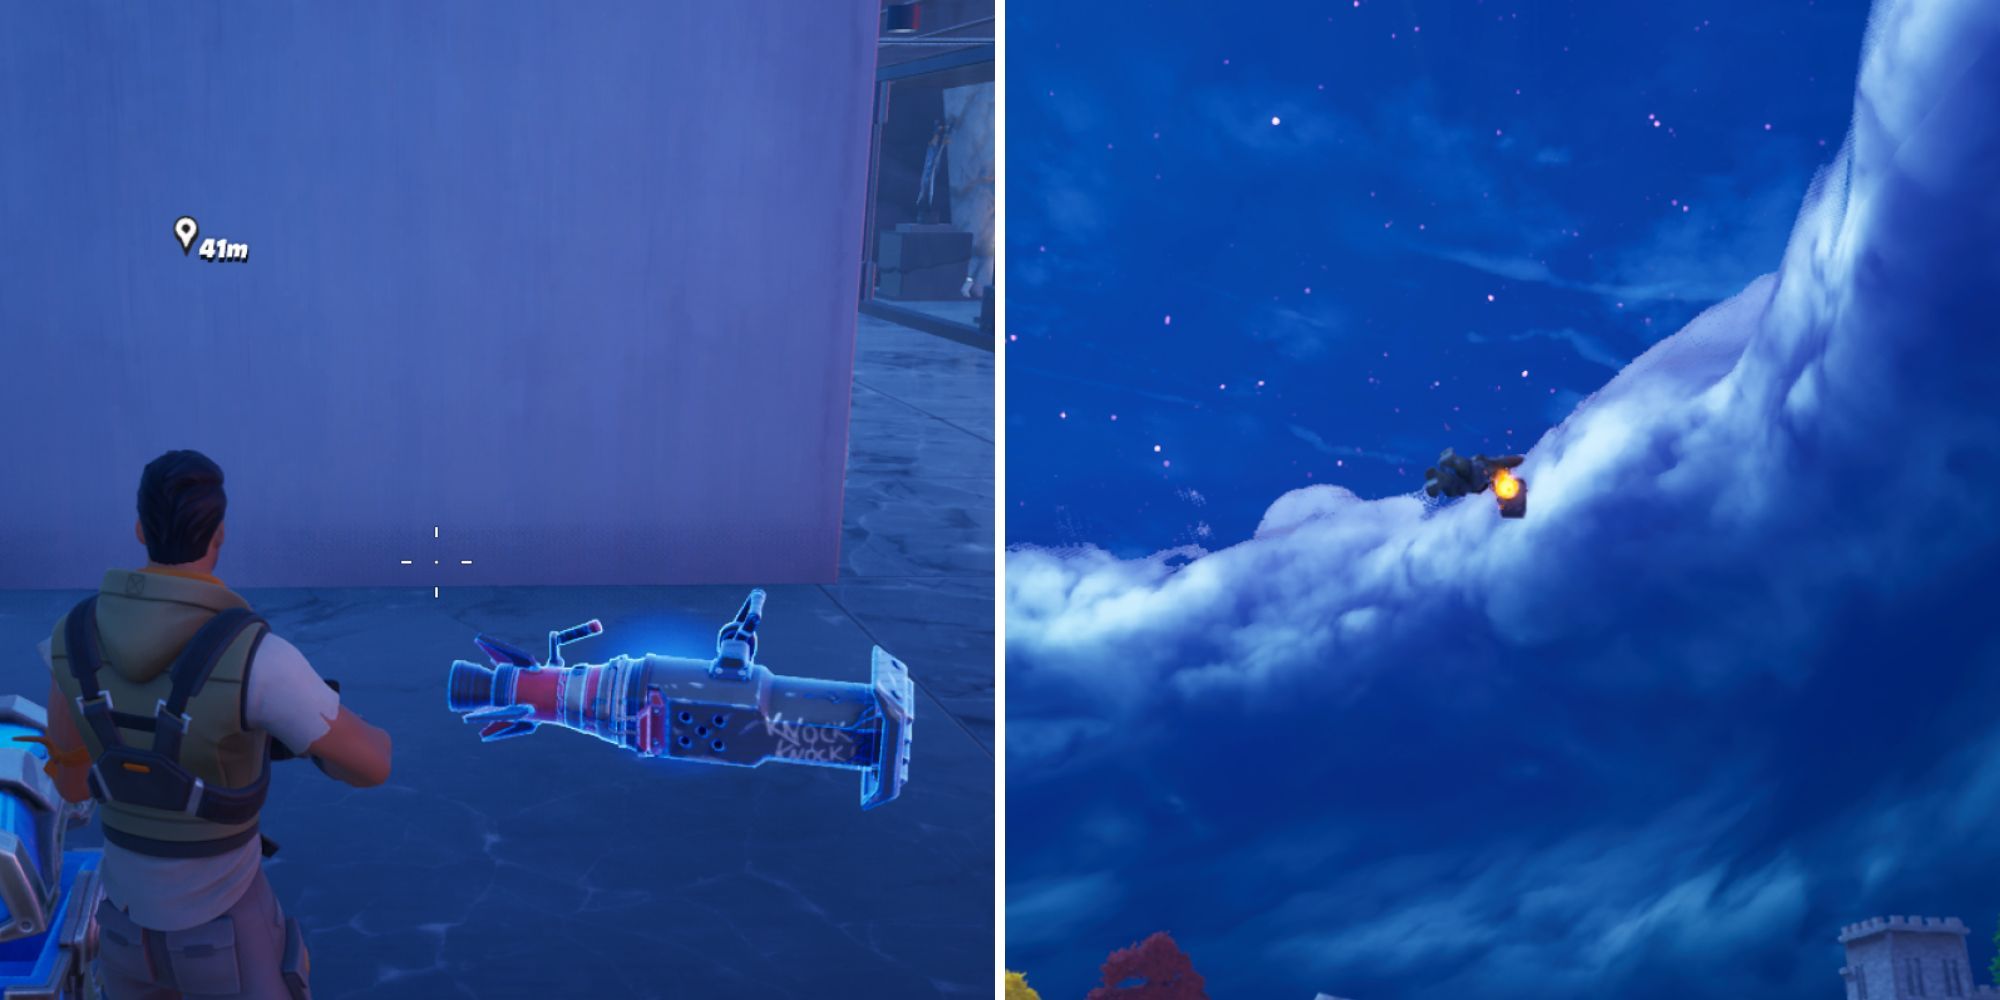 The Rocket Ram item on the ground and using the Rocket Ram to ram into the sky.